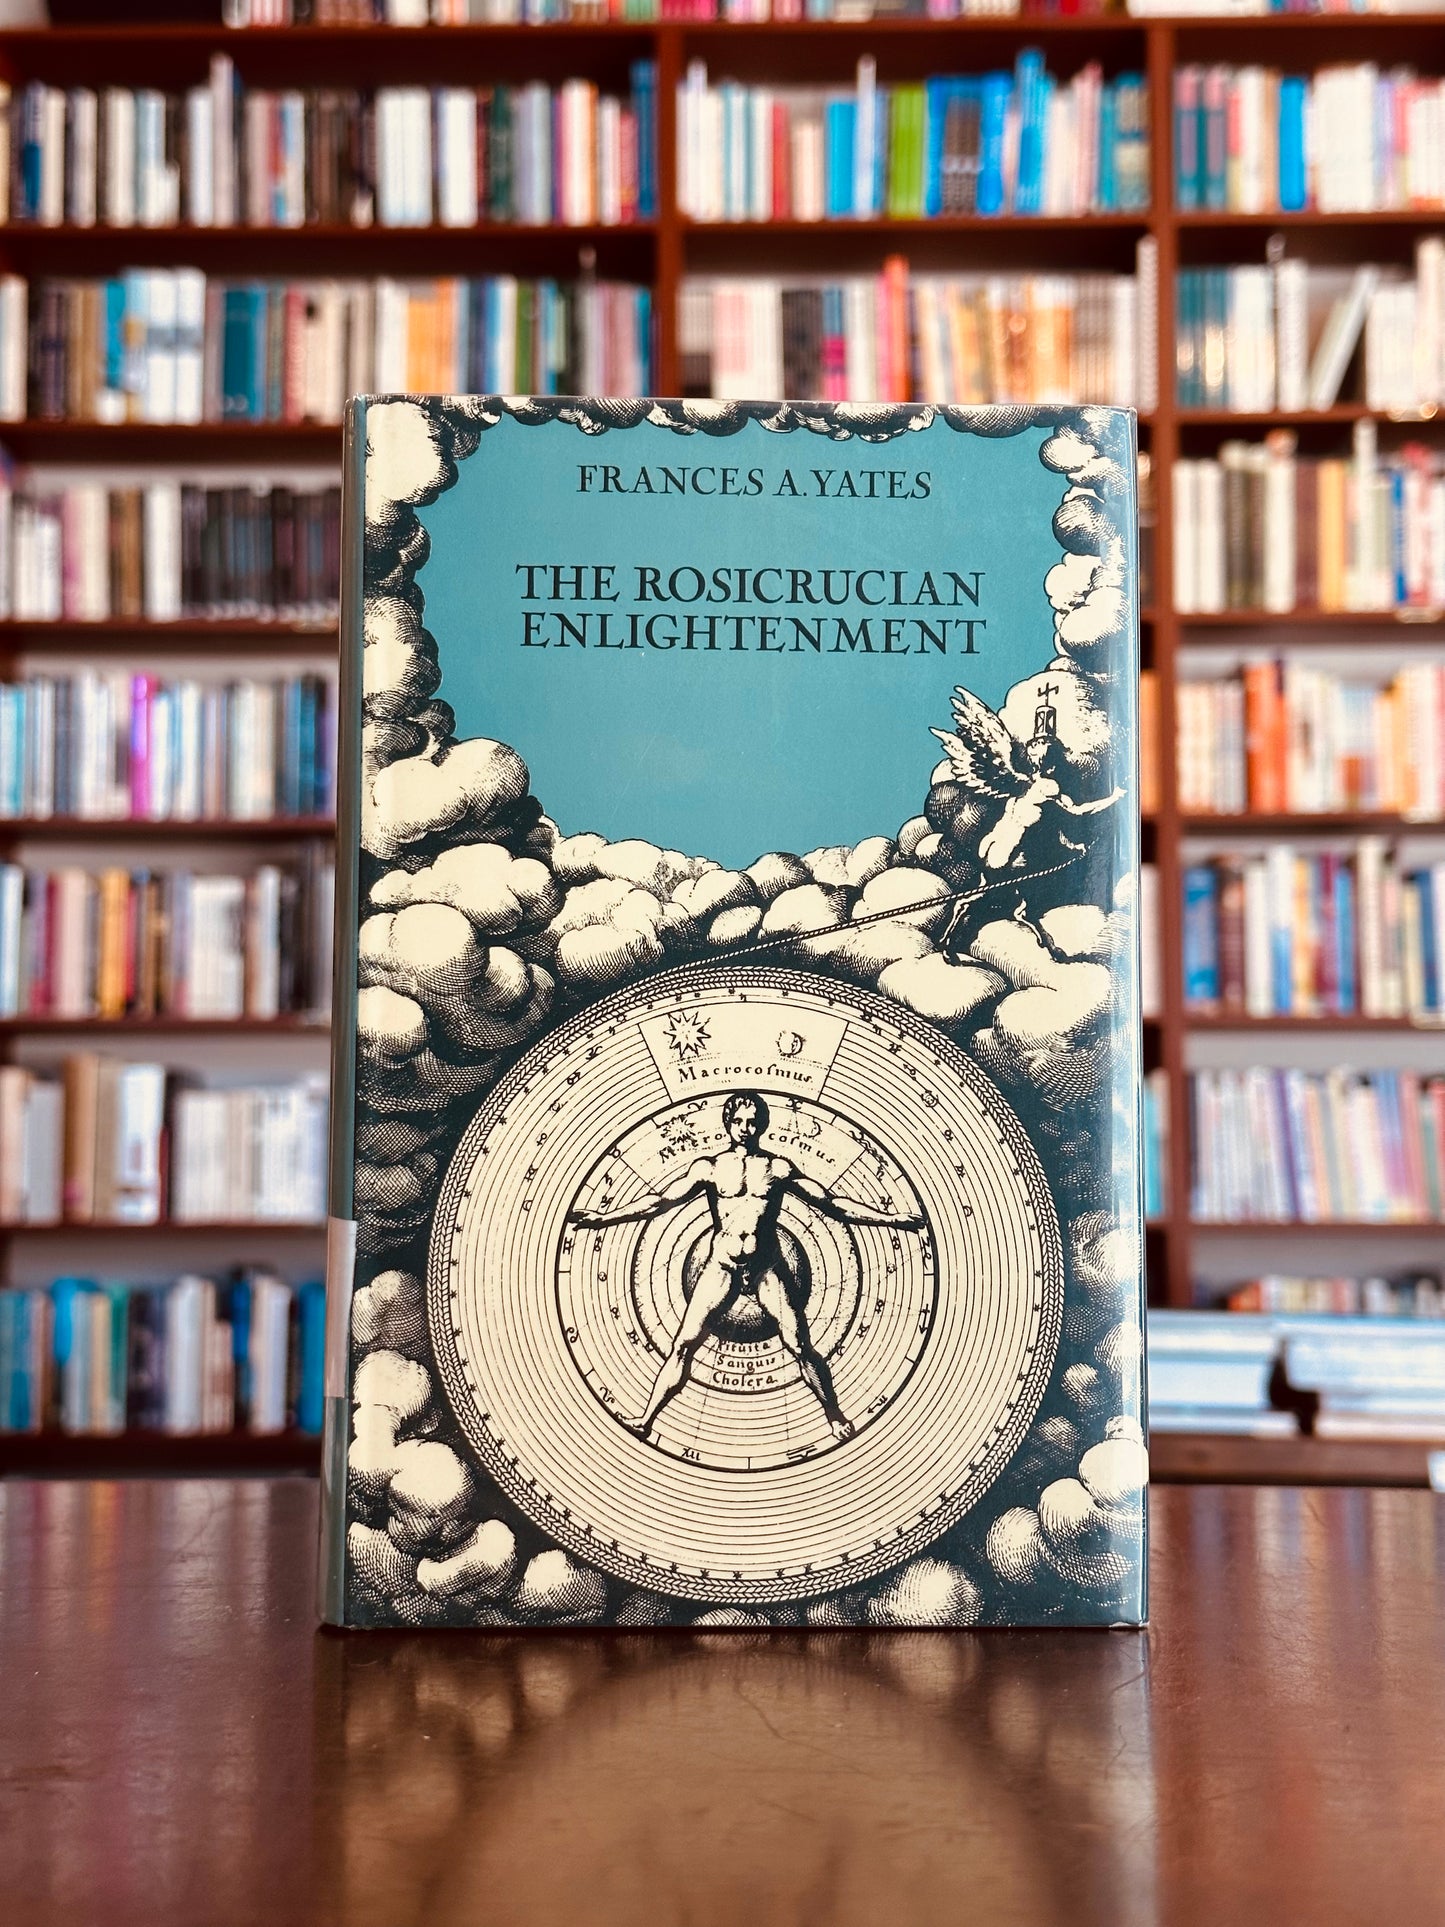 The Rosicrucian Enlightenment by Francis Yates